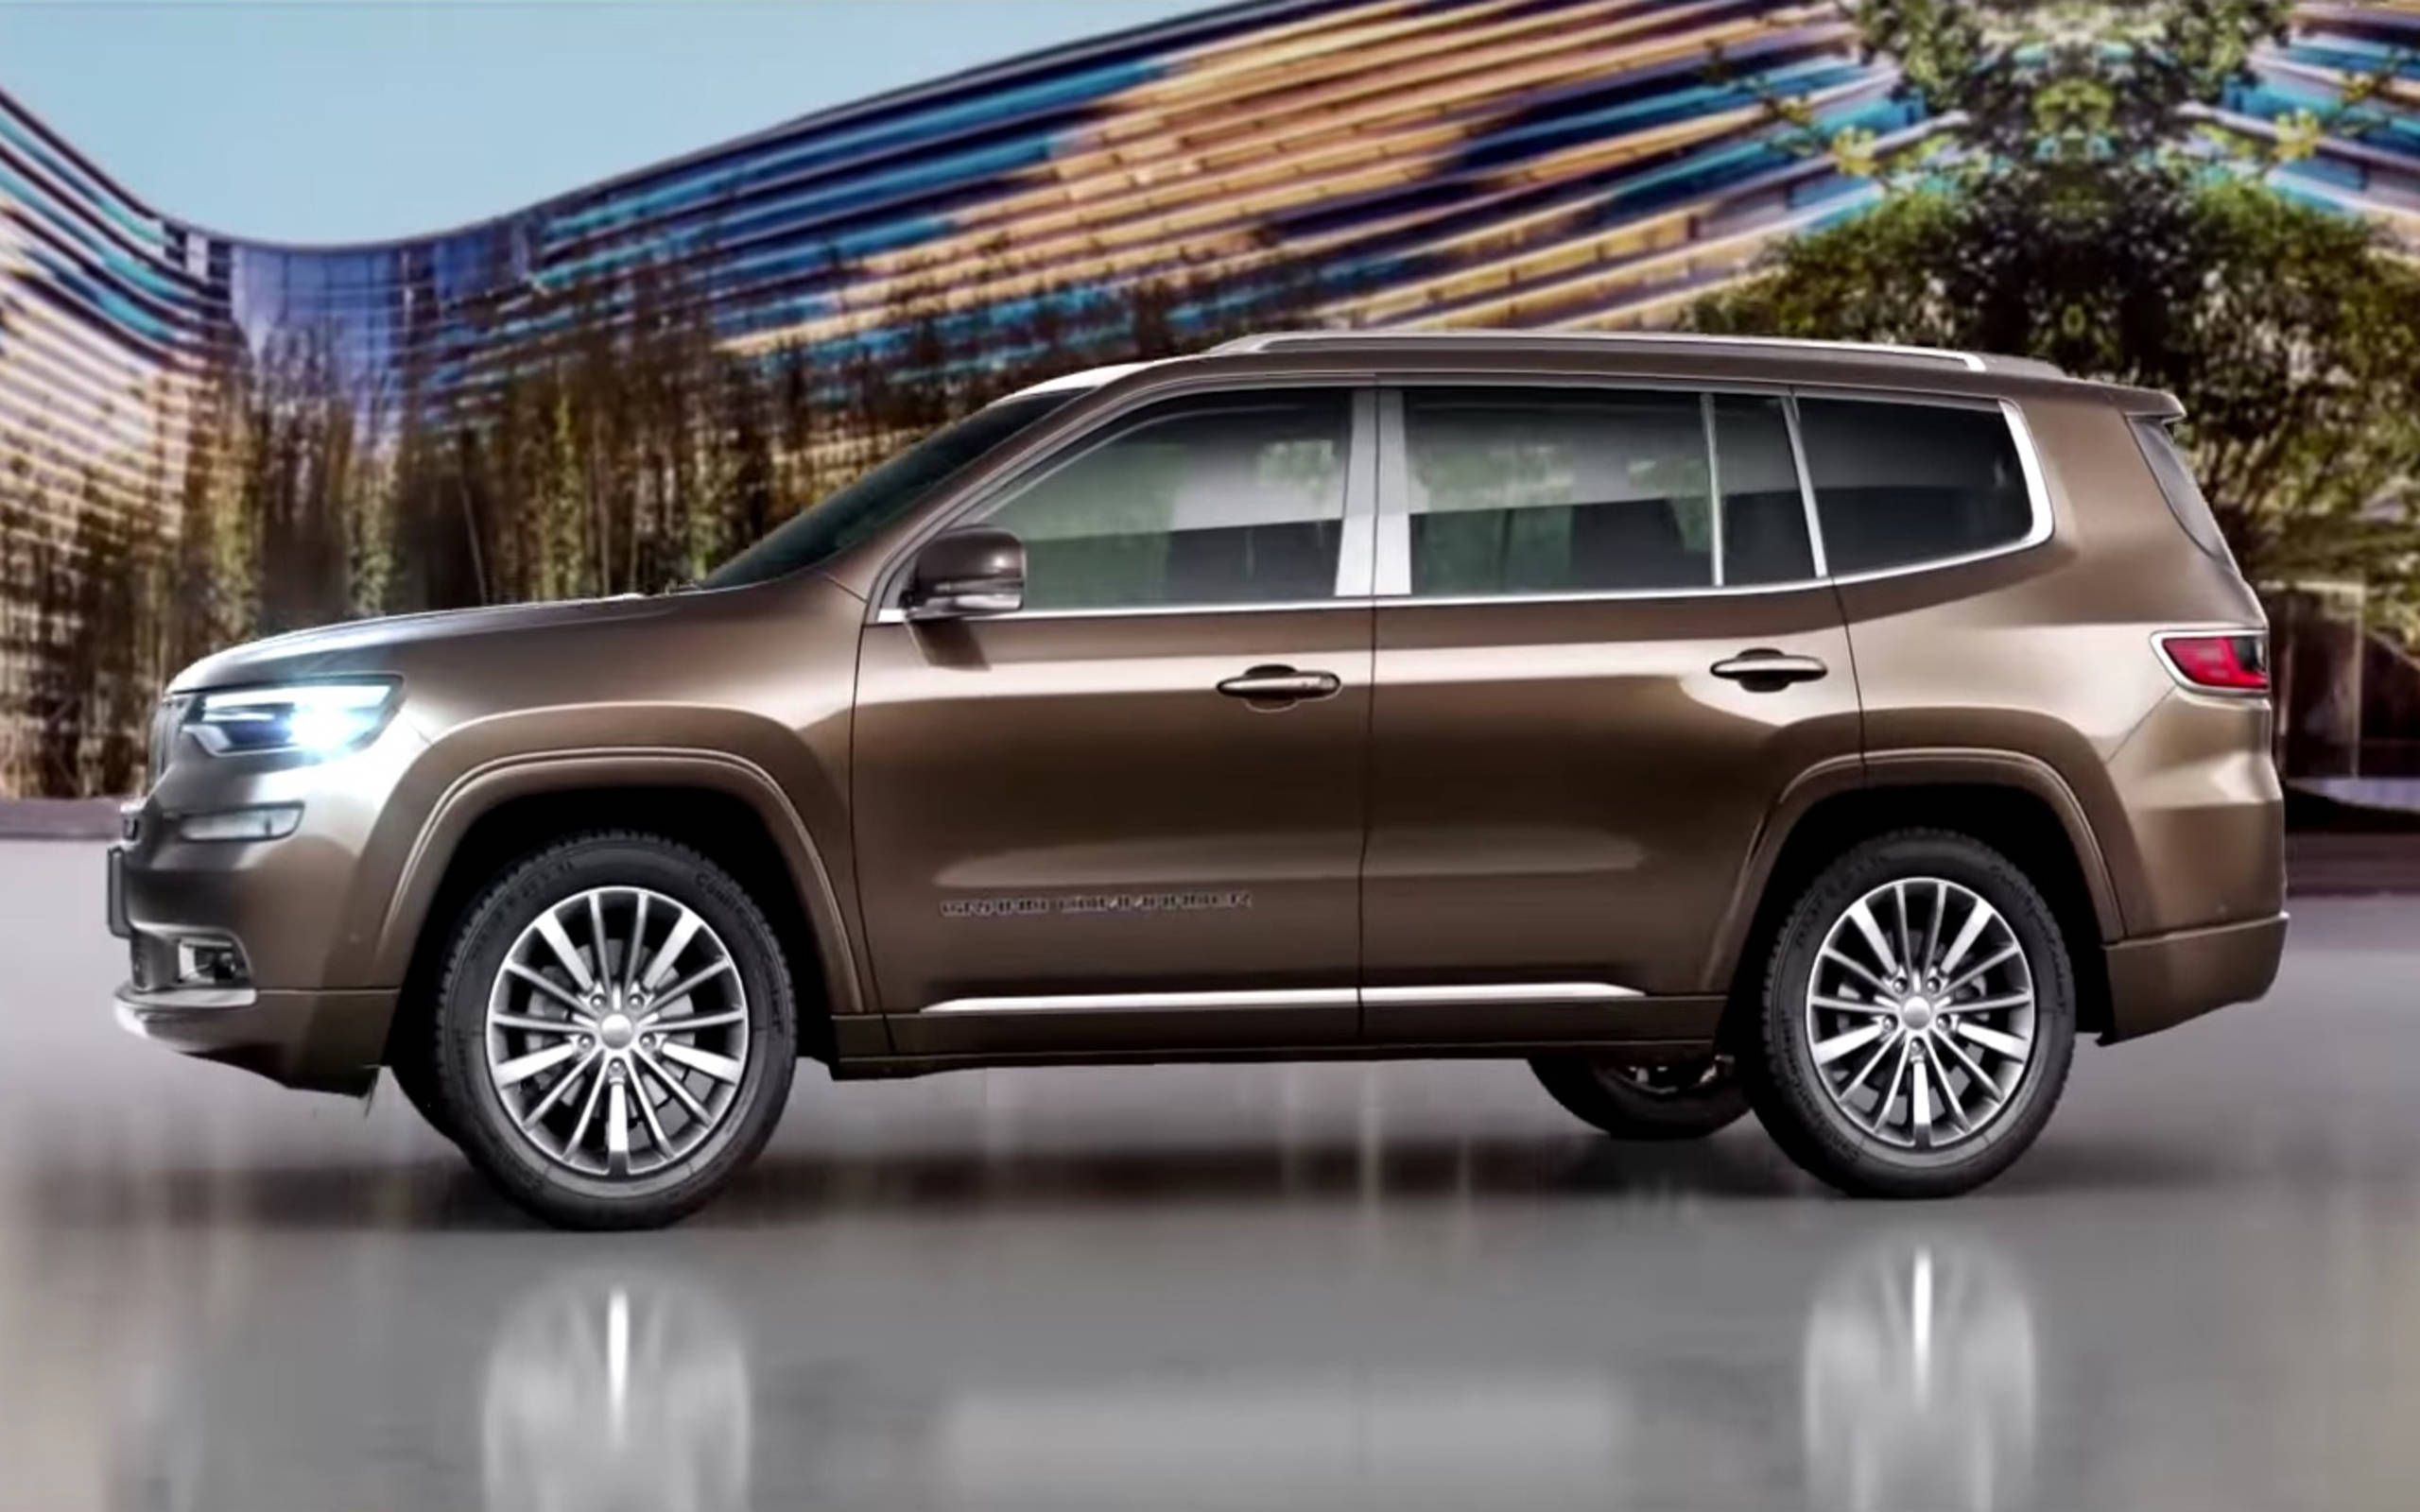 2019 Jeep Grand Commander is a seven-seater America won't get